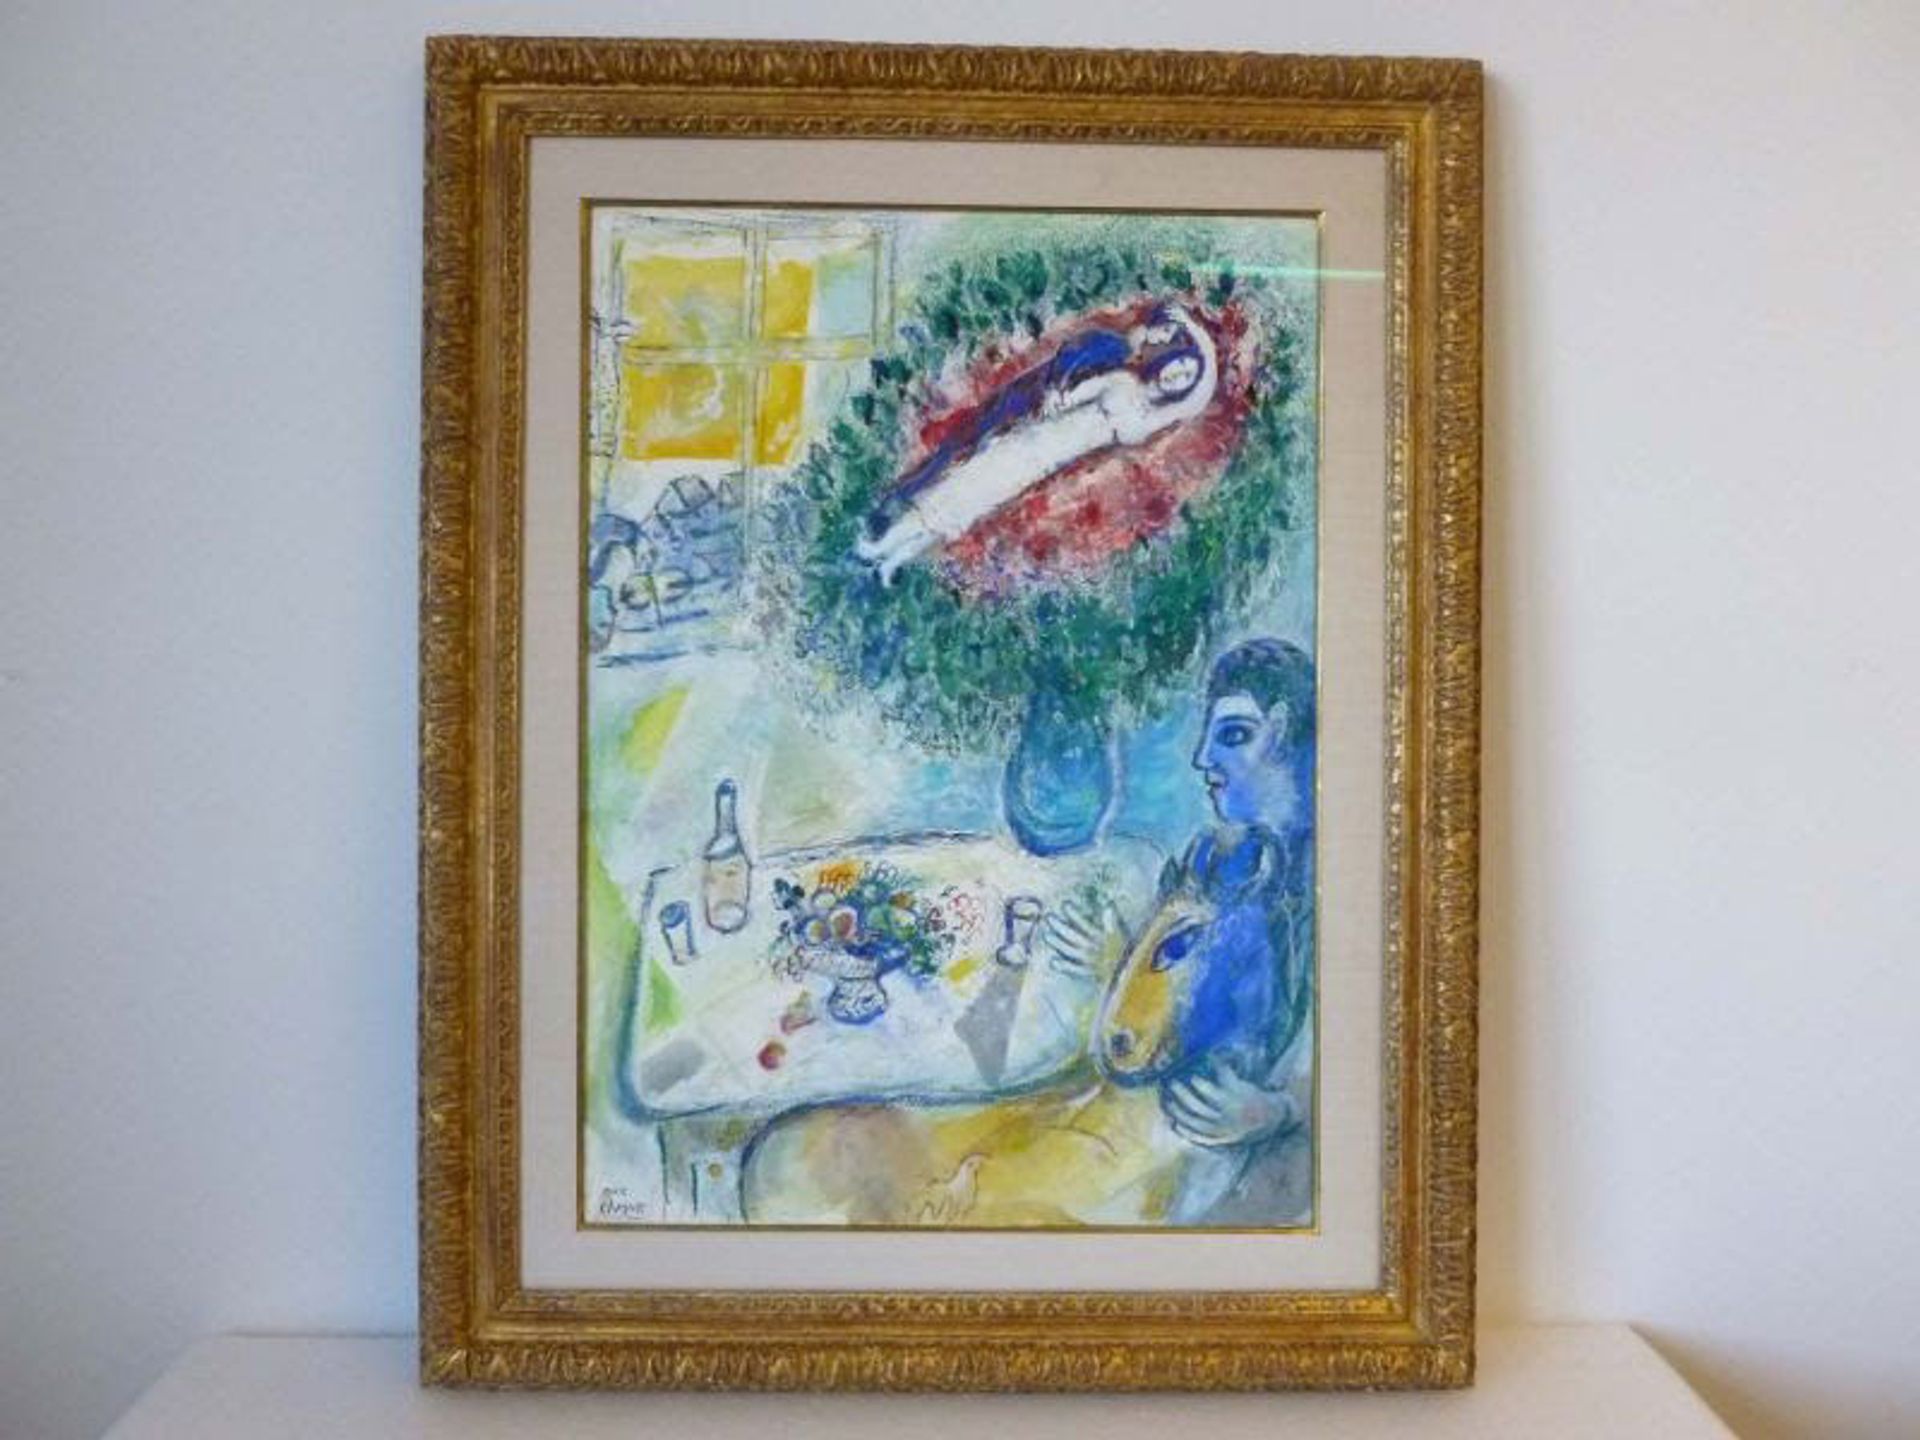 Chagall's Reverie was among the paintings sold by Sammons Courtesy of Manhattan District Attorney's office